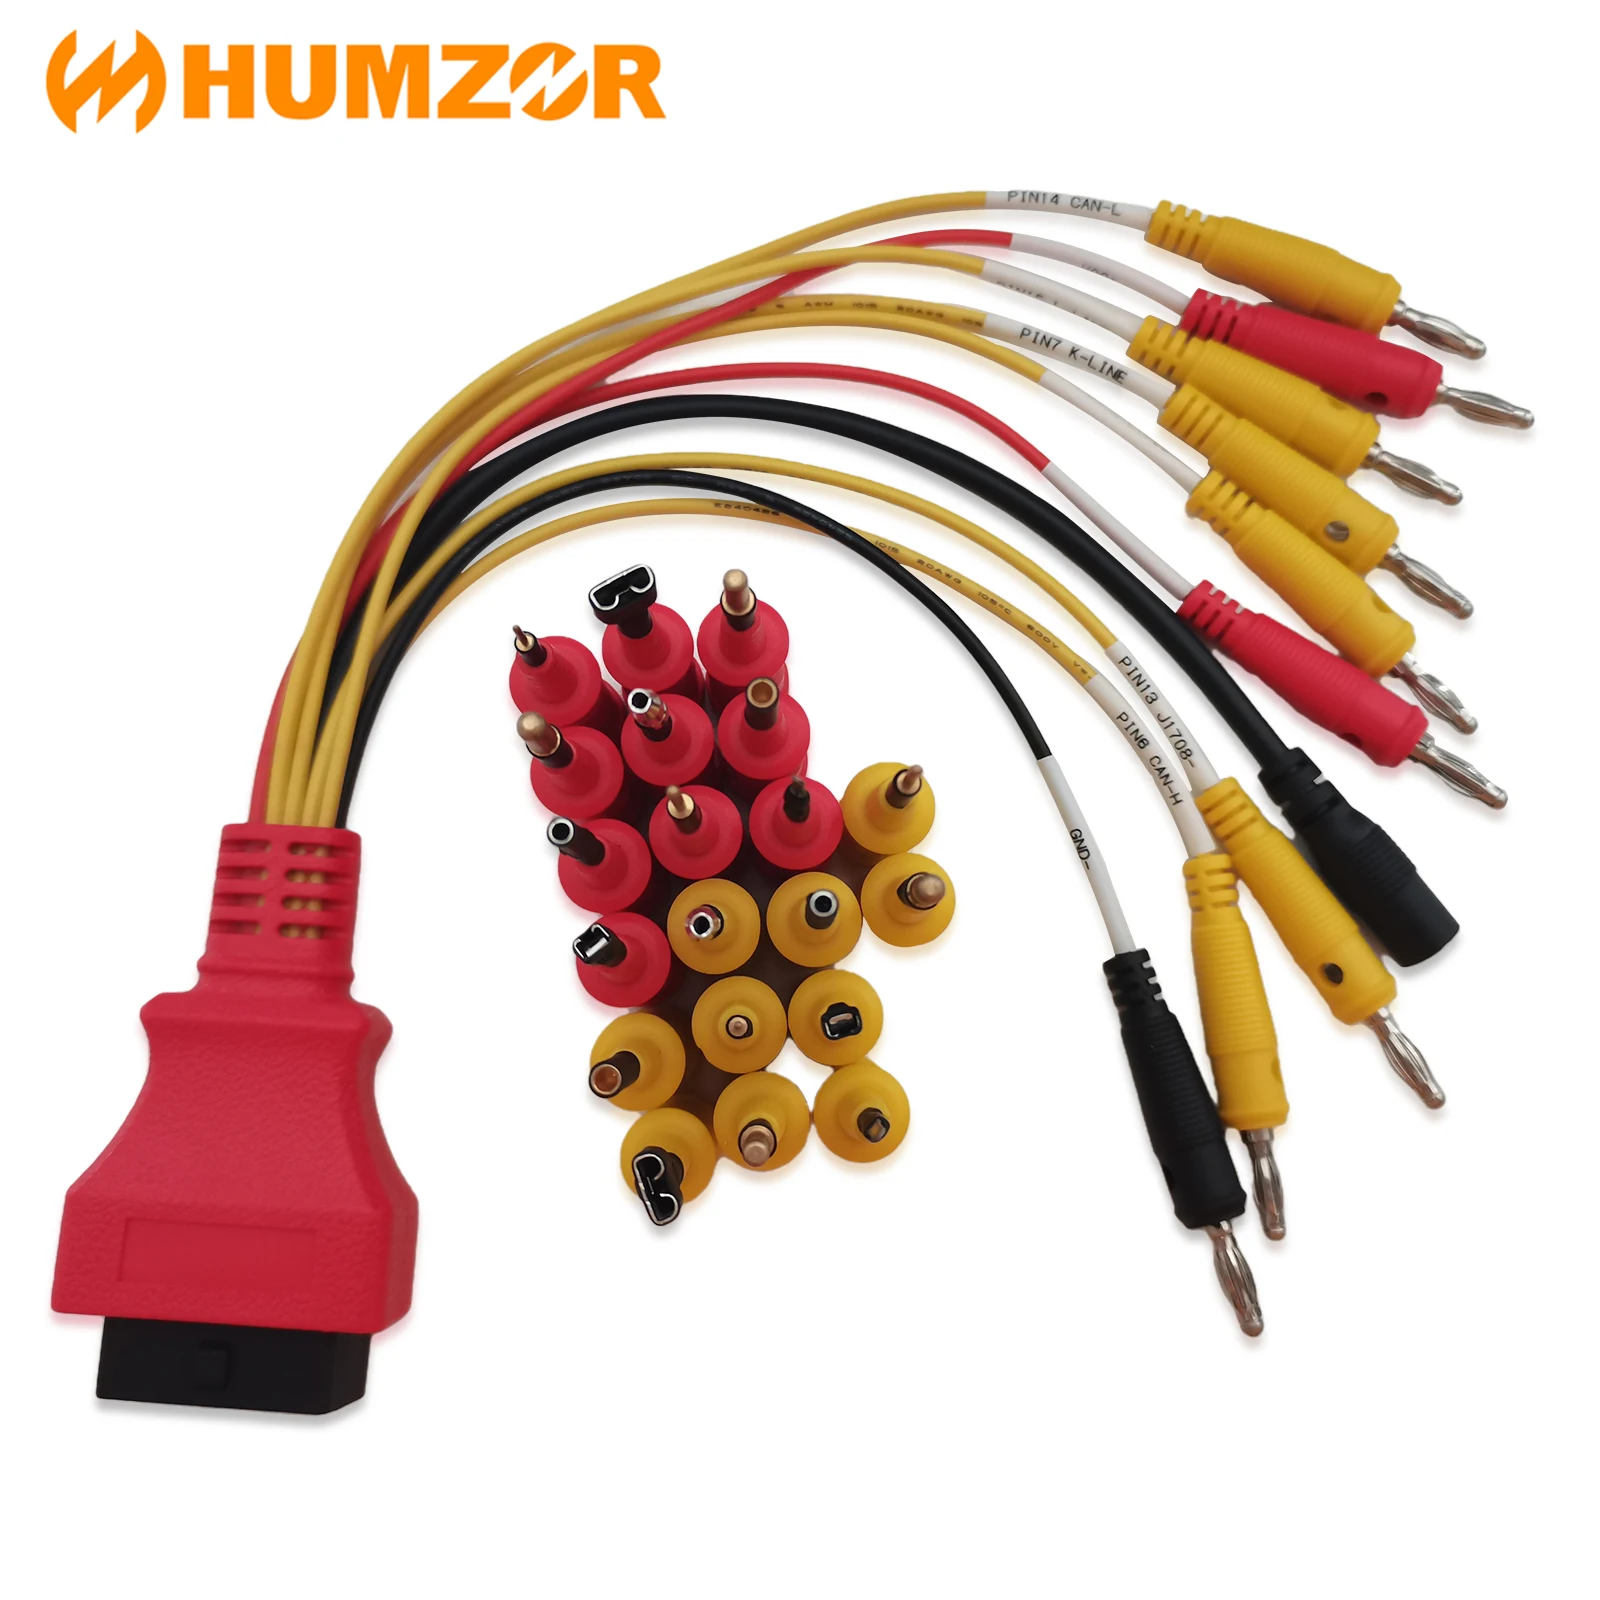 HUMZOR Car 16 pin Female OBD2 Diagnostic Tool Connector Adapter Cable Universal 16-Pin OBD II Diagnostic Adapter Cable Kit